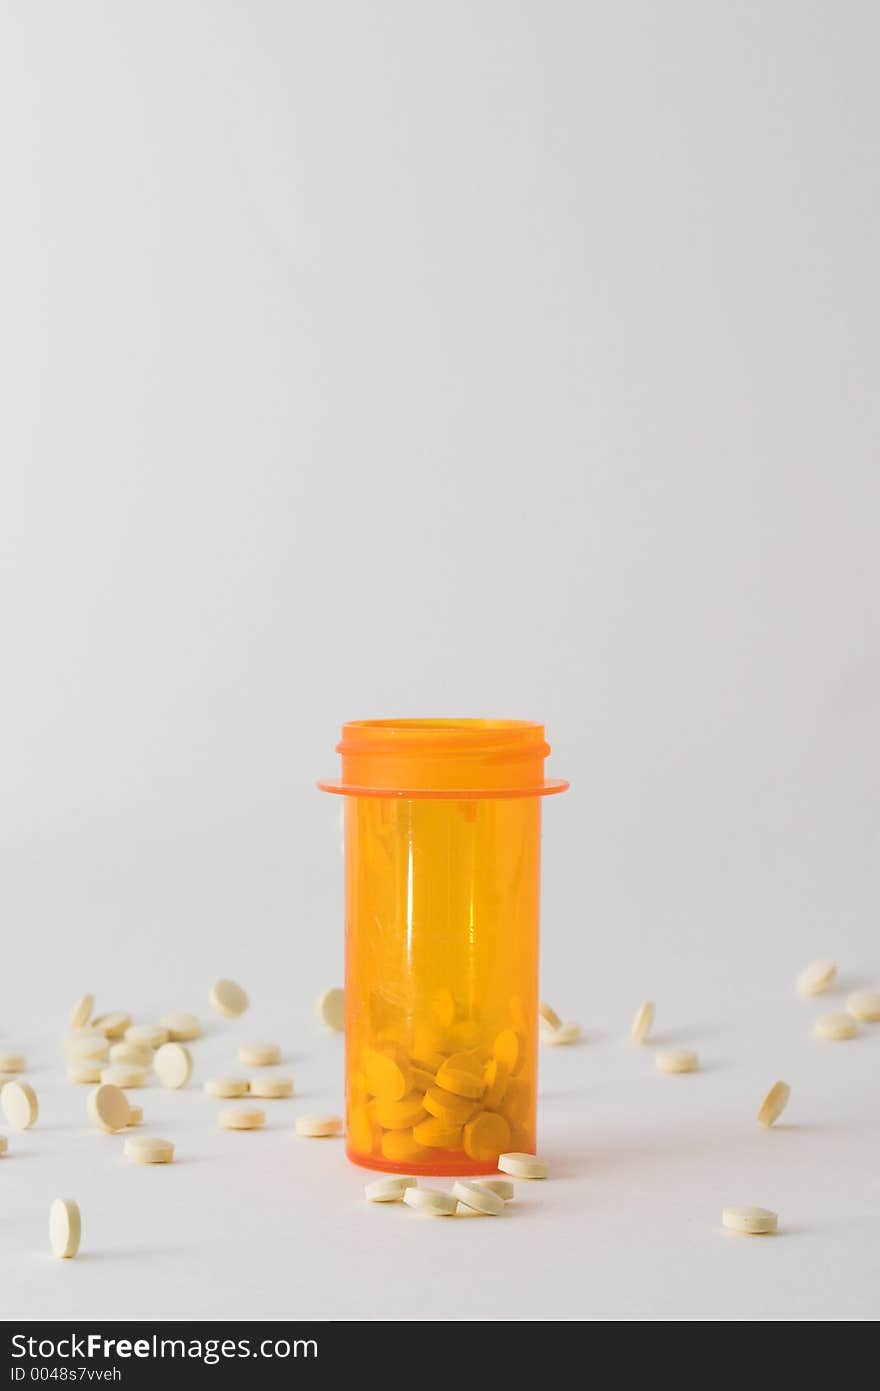 Medicine bottle on table with tablets around it; bottle is placed in the center of the frame with some pills in the bottle and some laying around it. Medicine bottle on table with tablets around it; bottle is placed in the center of the frame with some pills in the bottle and some laying around it